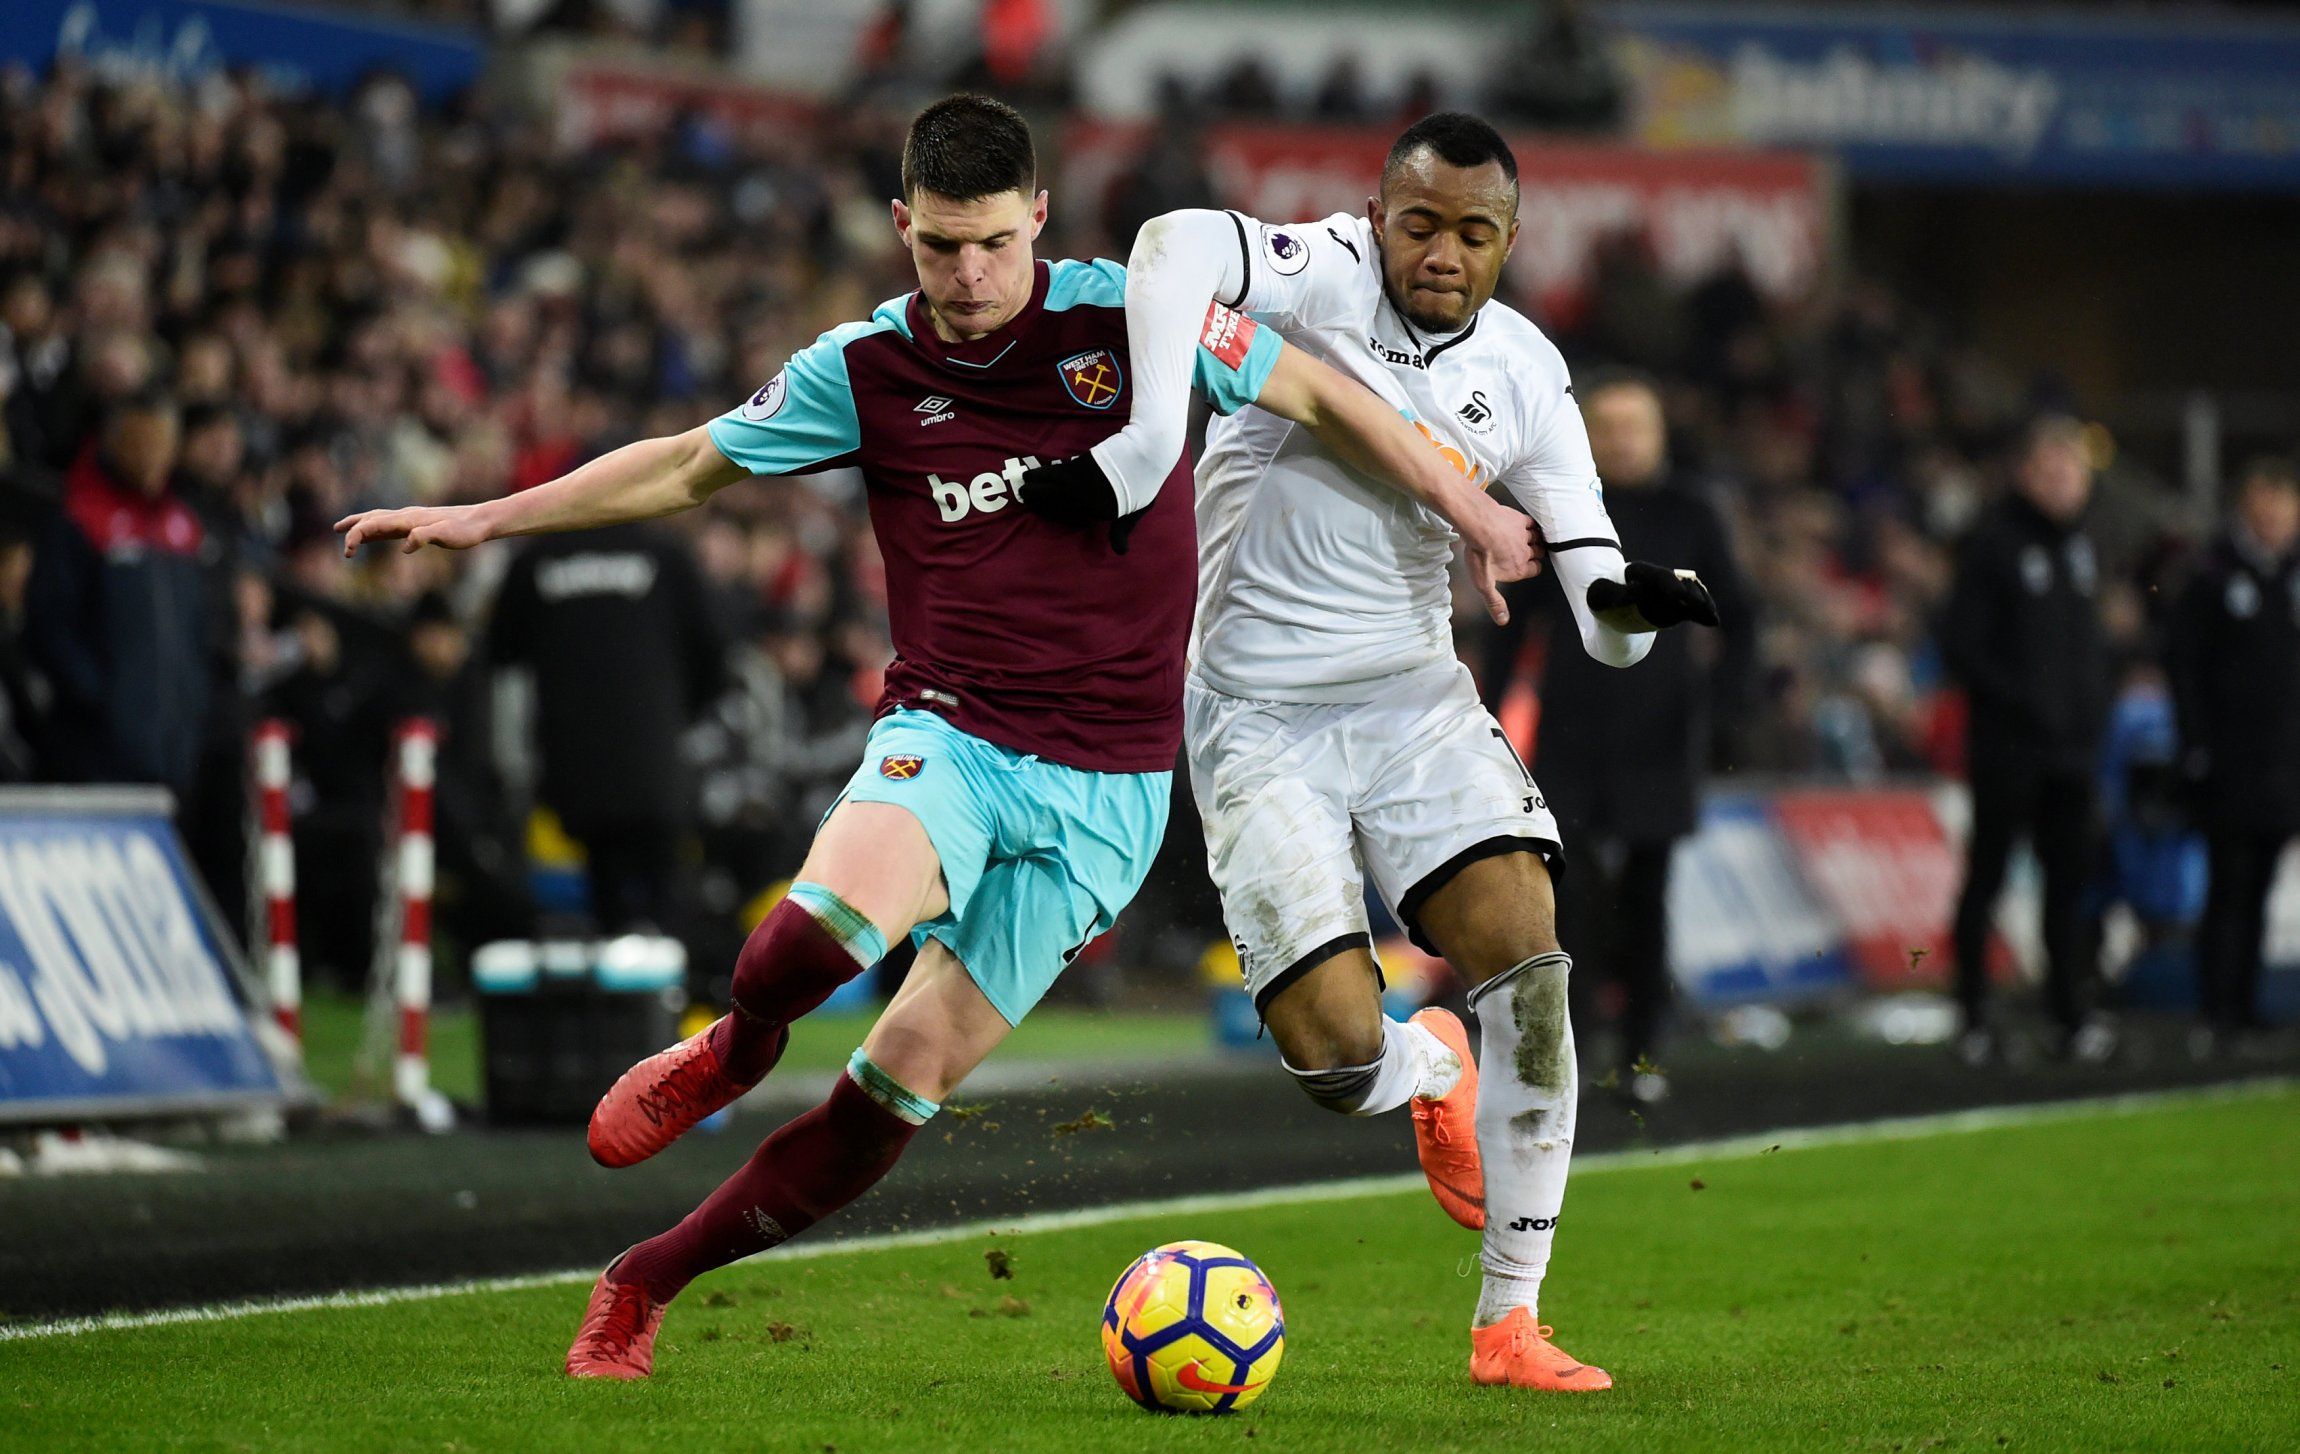 Declan Rice in action for West Ham United